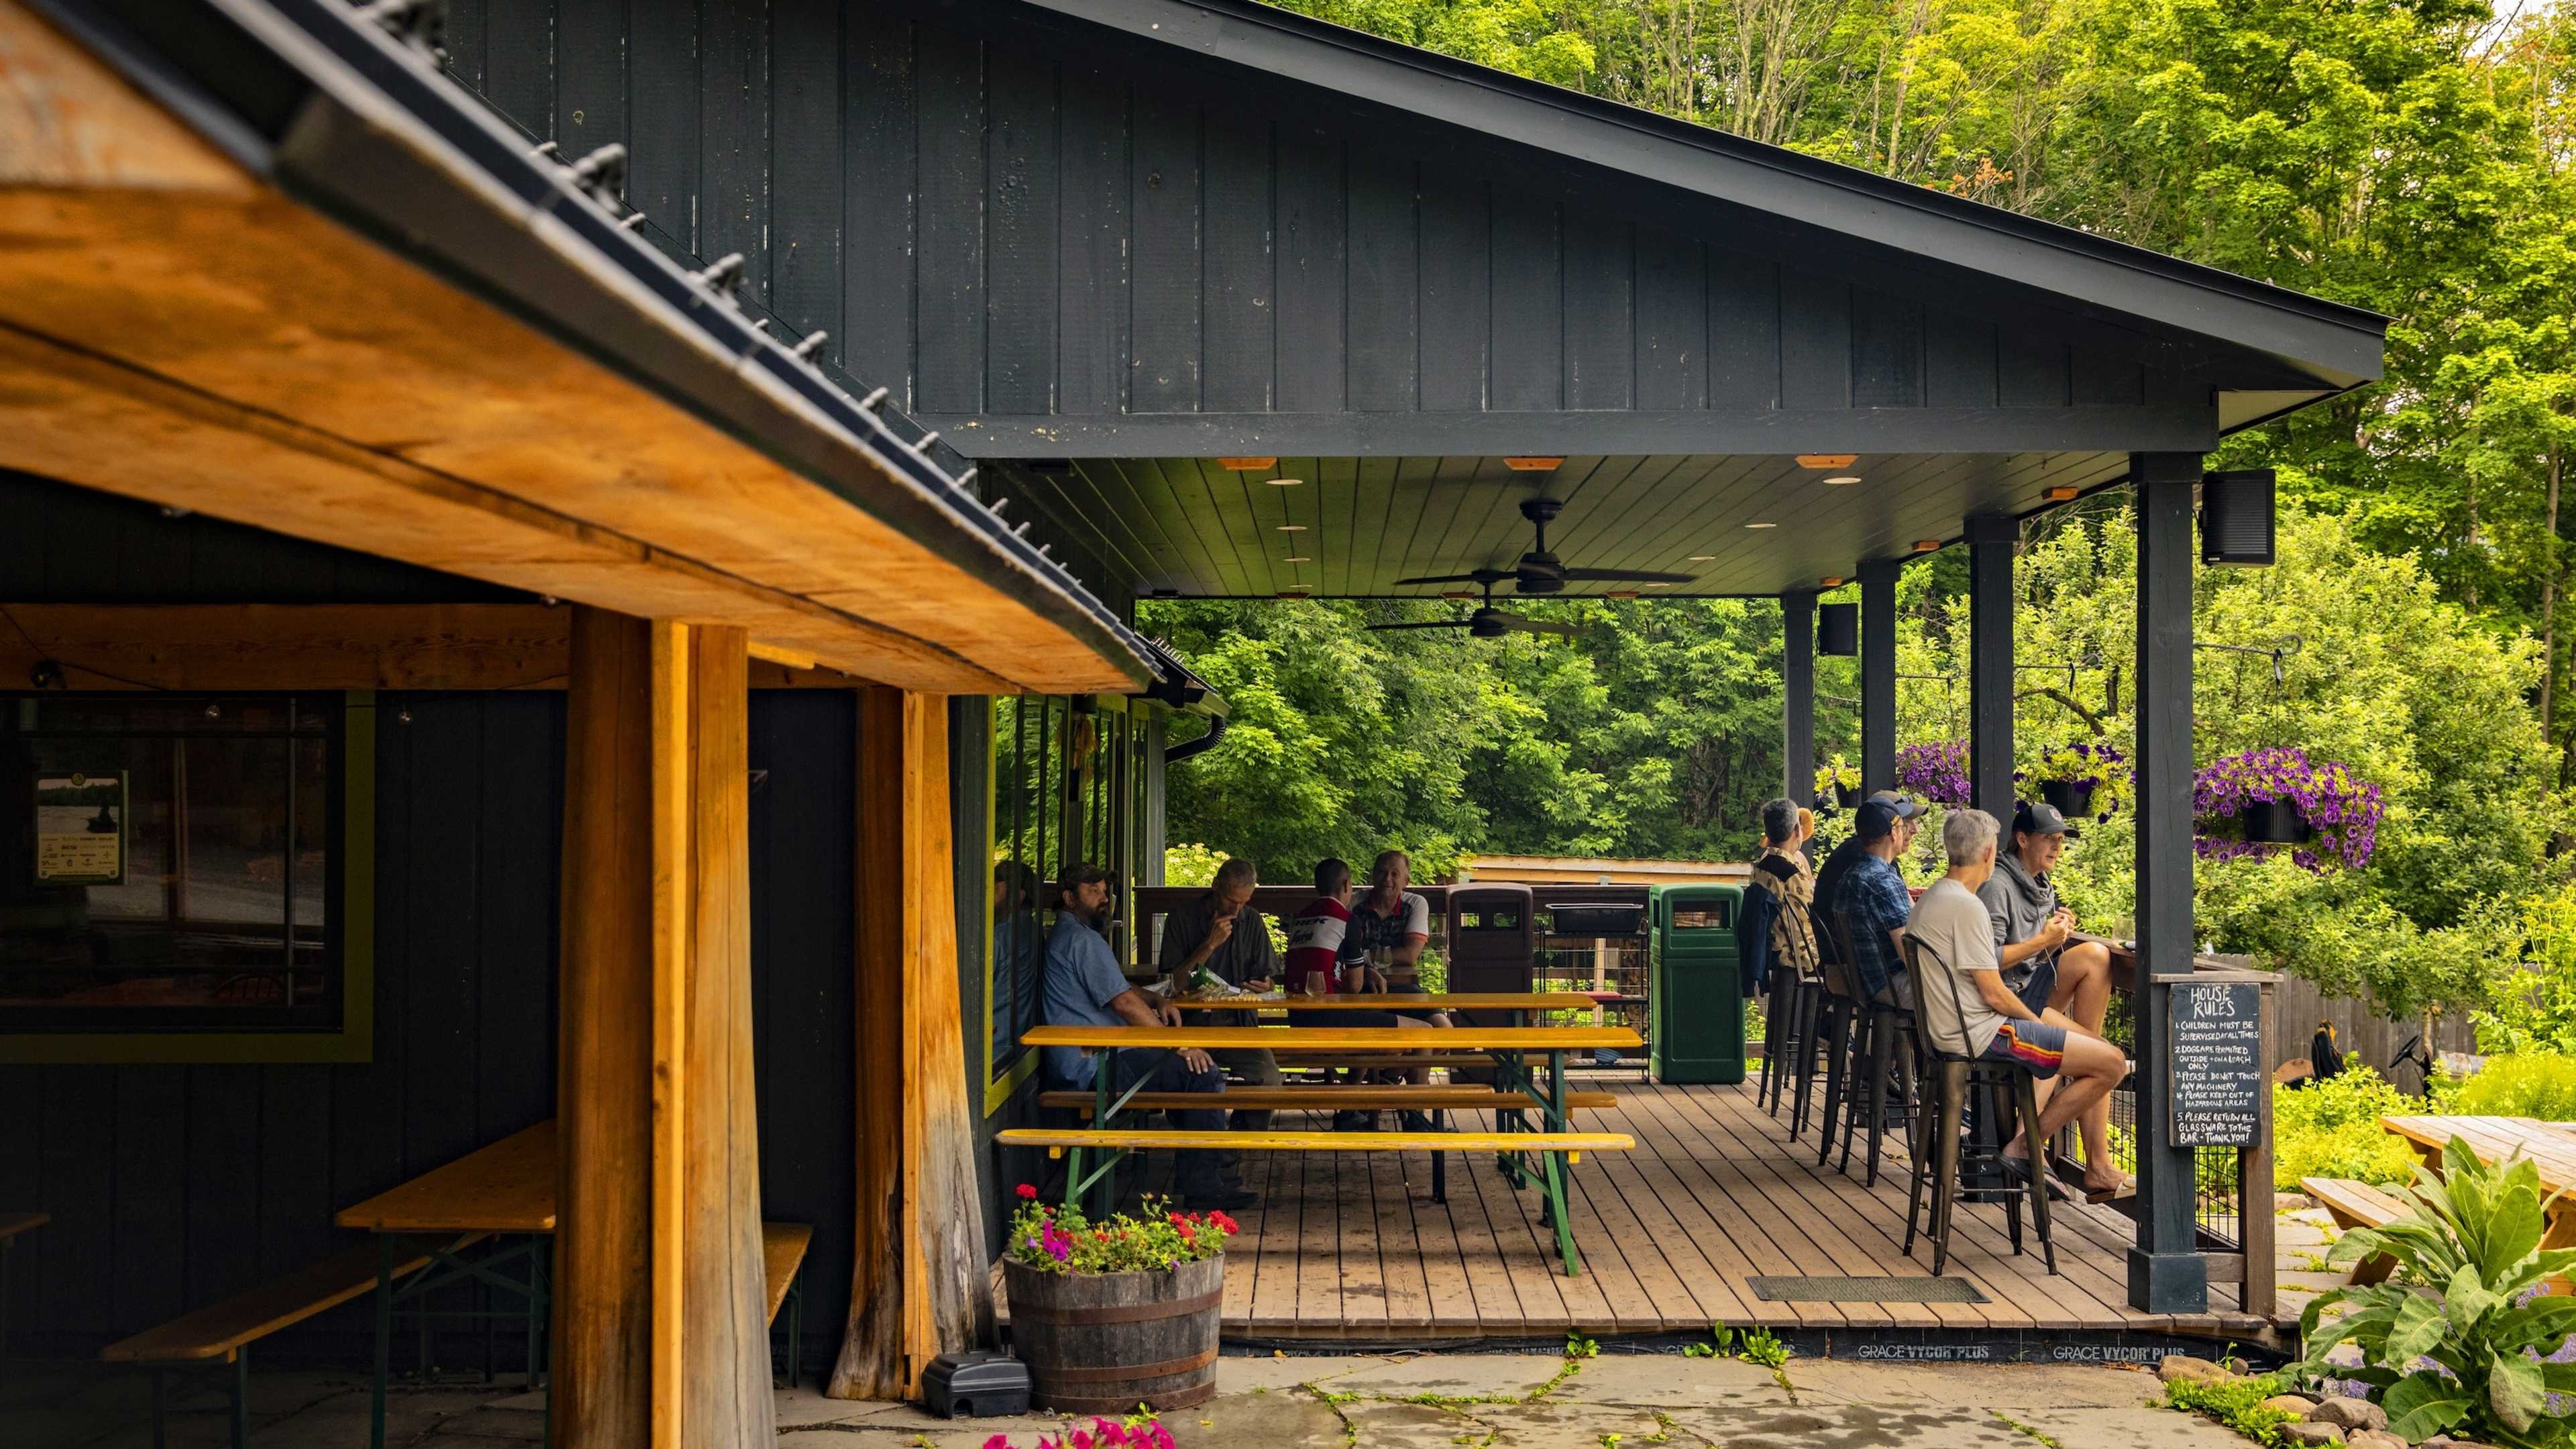 The Best Breweries In The Hudson Valley & The Catskills image